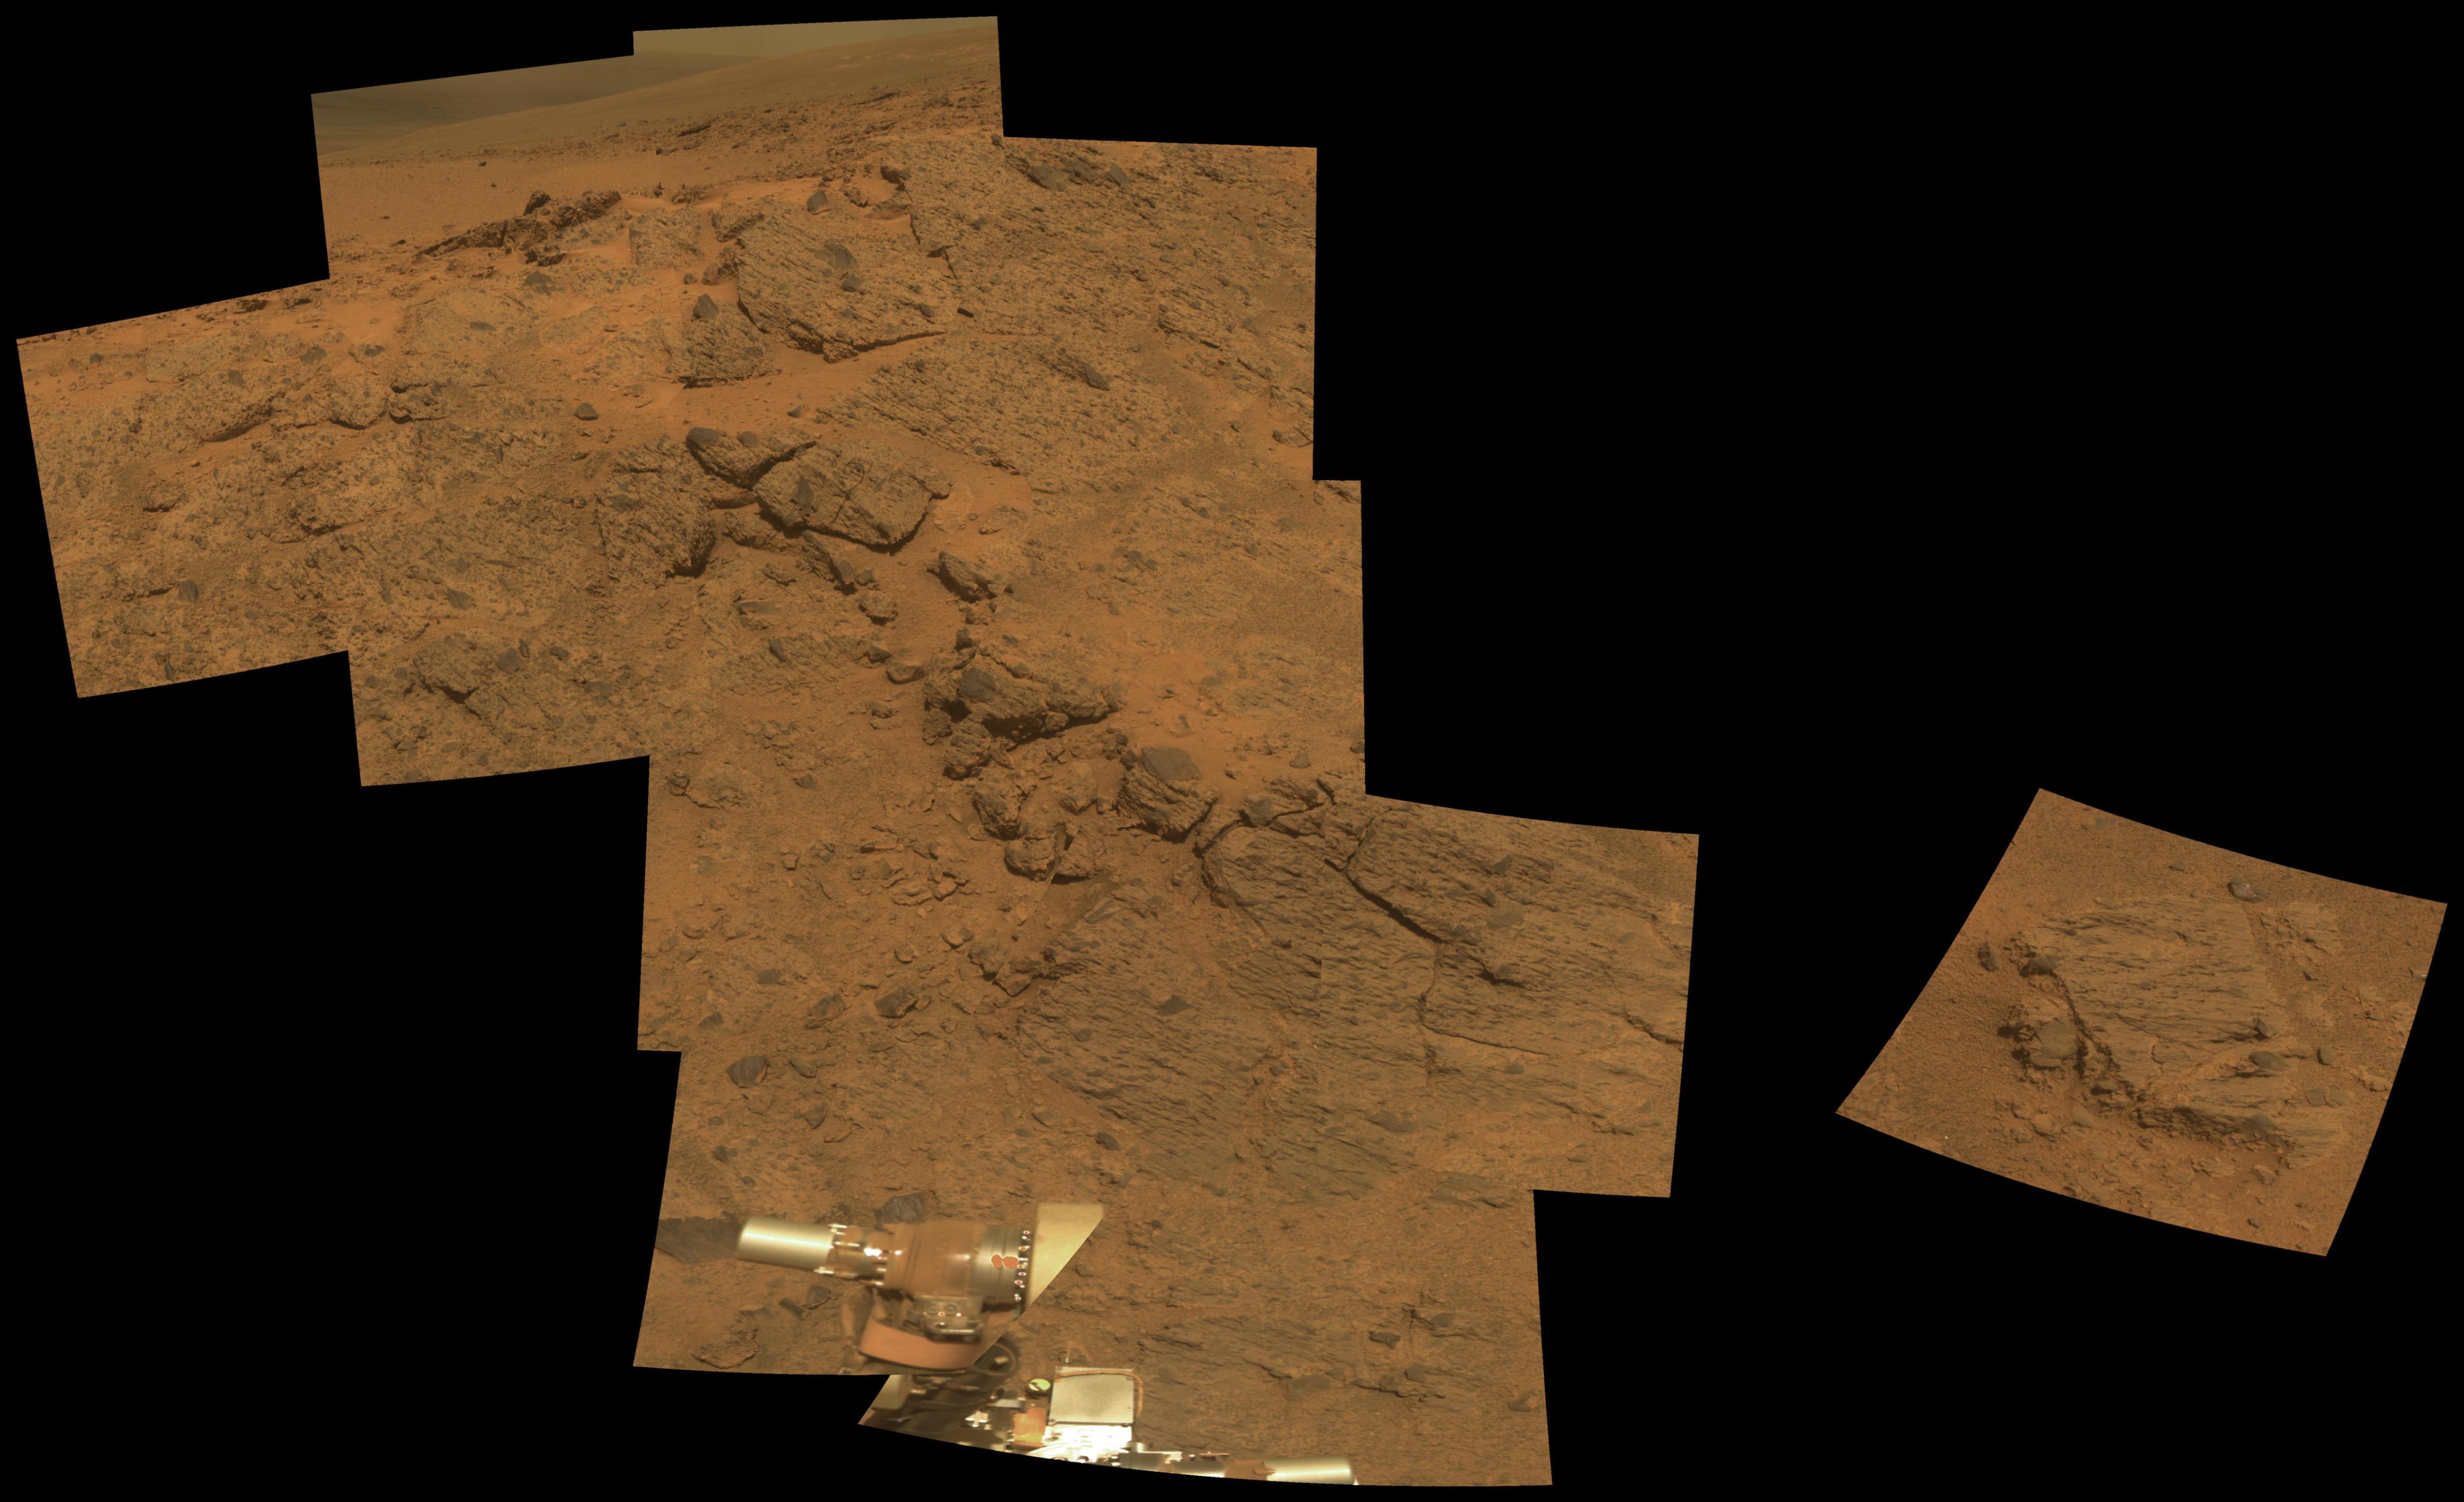 NASA's Mars Exploration Rover Opportunity observed this outcrop on the "Murray Ridge" portion of the rim of Endeavour Crater as the rover approached the 10th anniversary of its landing on Mars.